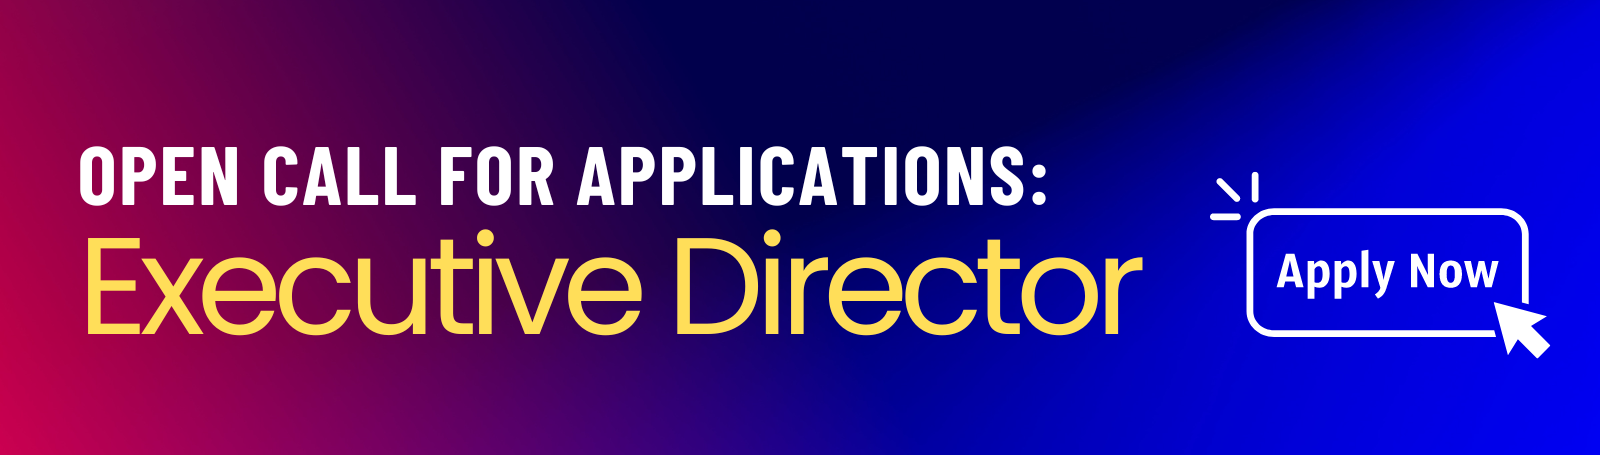 Call for Applications: Executive Director